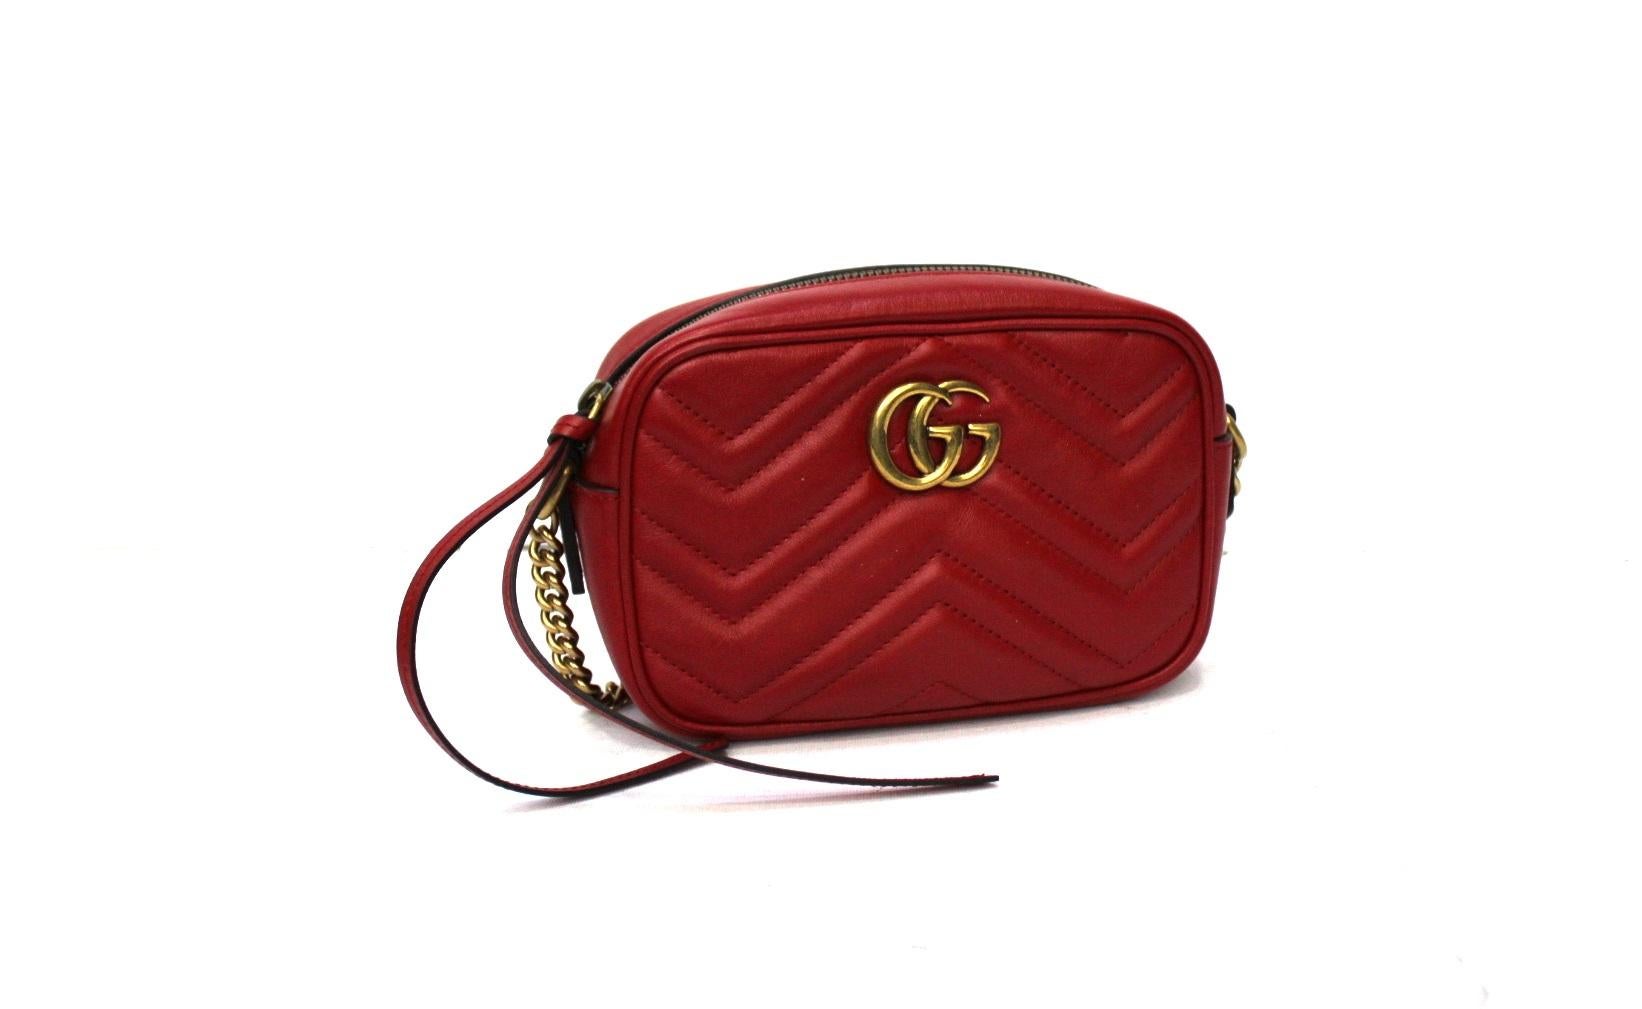 Gucci Marmont mini camera bag model in red leather. Gold hardware. Zip closure. Internally quite large. Excellent for your trendy outfits. It is in perfect condition.